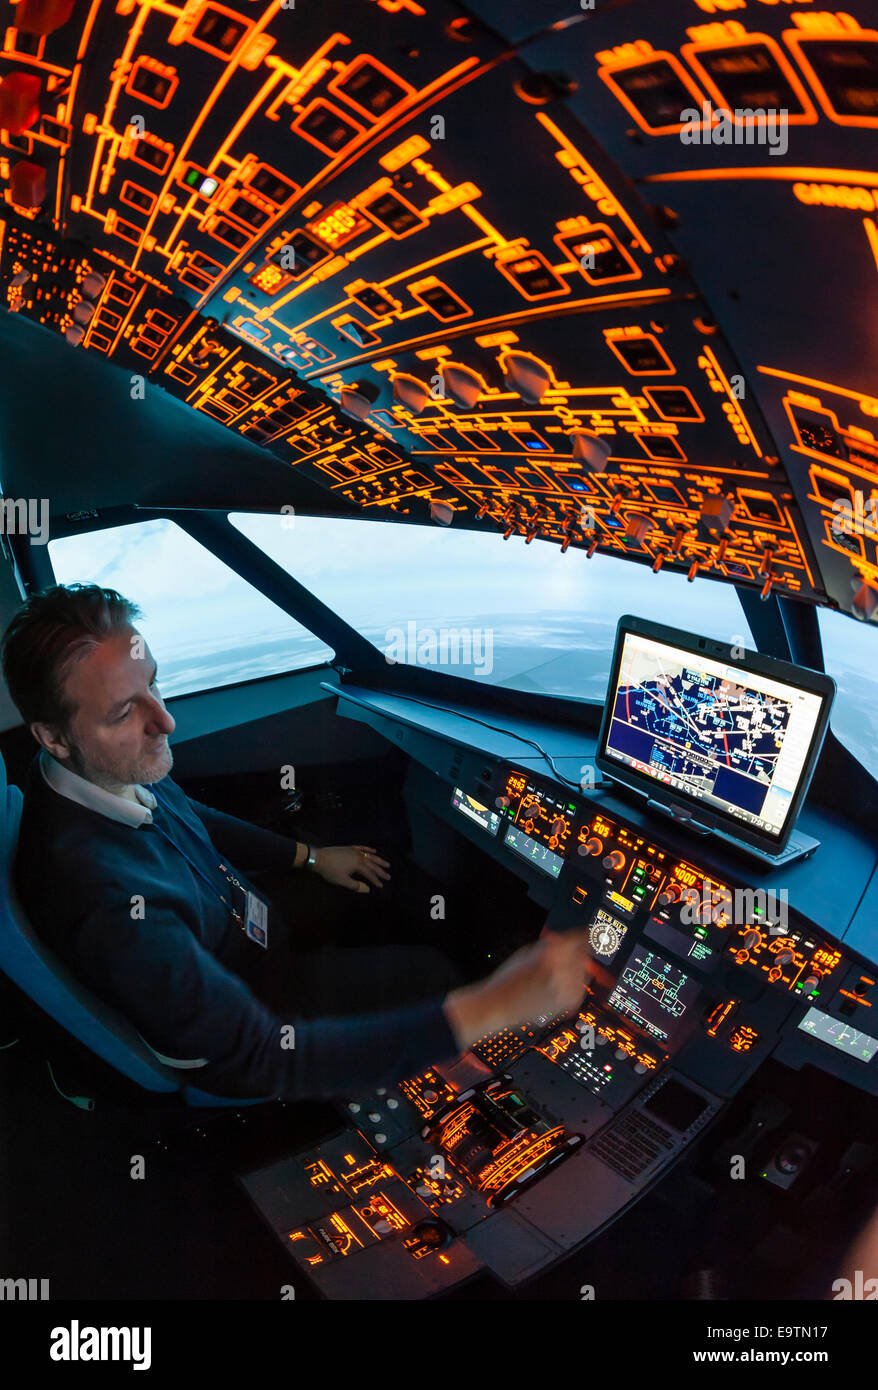 Cockpit of an Airbus A320 flight simulator that is used for training of professional airline pilots (pilot adjusting controls) Stock Photo